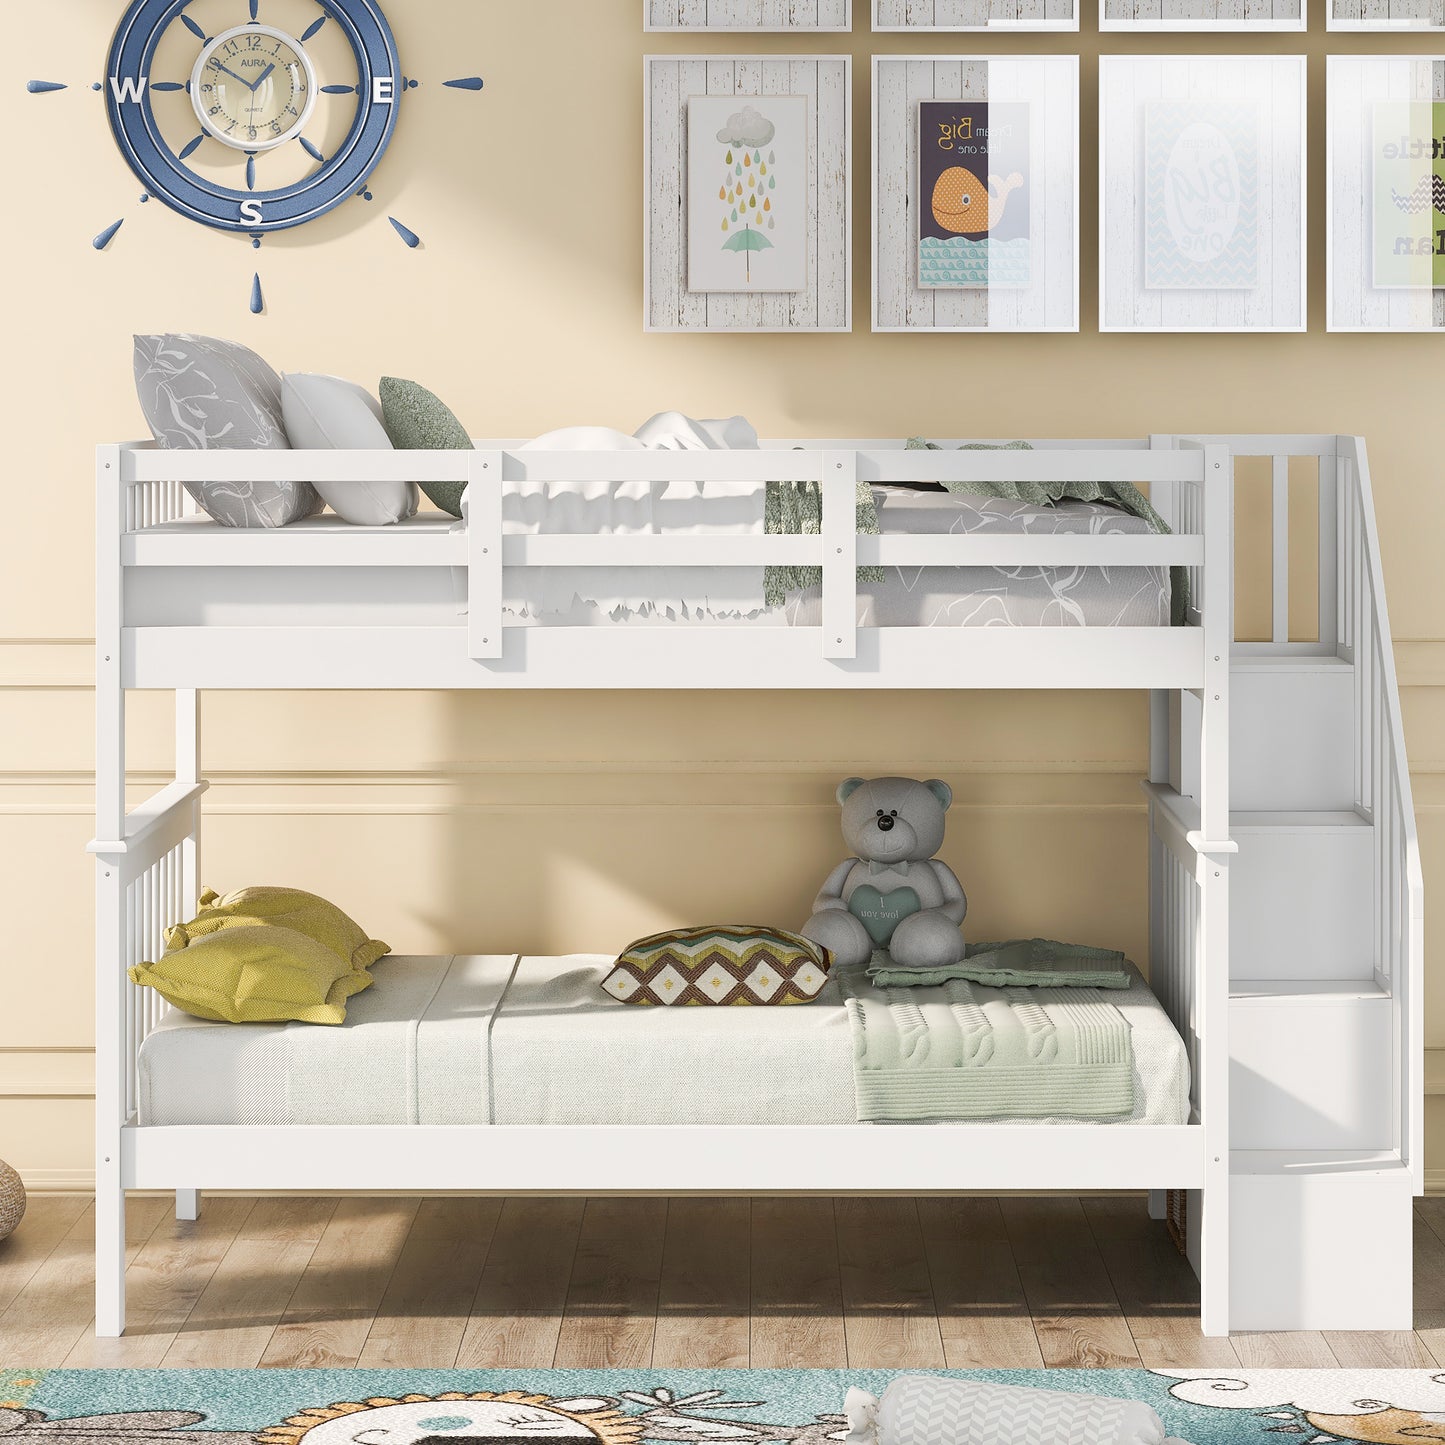 Twin over Twin White Wood Detachable Bunk Bed with Storage in Stairs